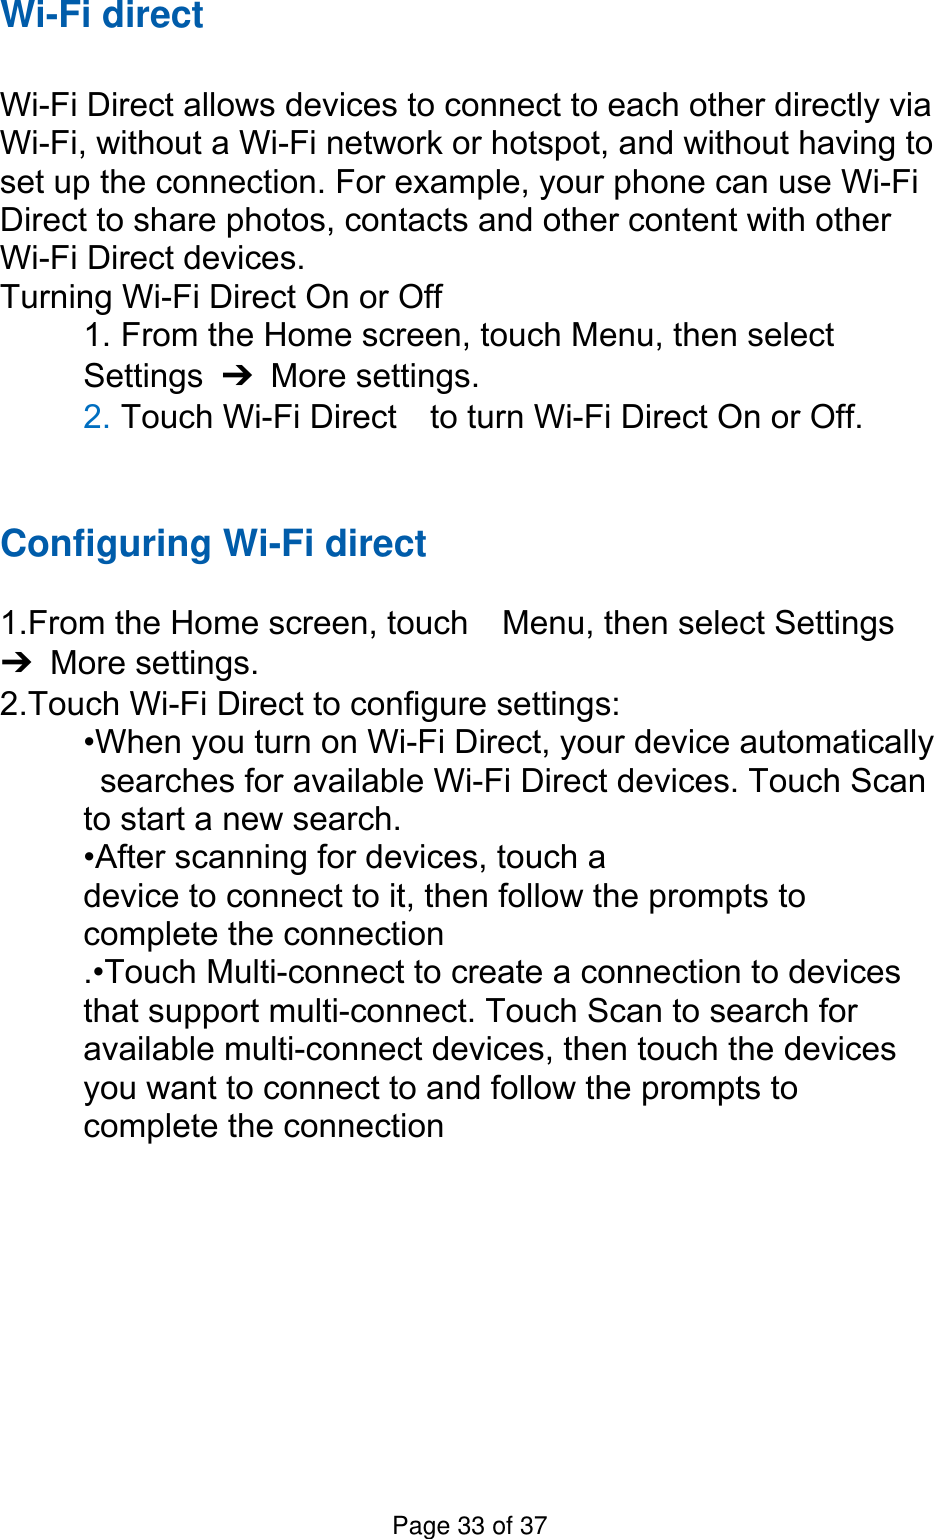 Wi-Fi direct  Wi-Fi Direct allows devices to connect to each other directly via Wi-Fi, without a Wi-Fi network or hotspot, and without having to set up the connection. For example, your phone can use Wi-Fi Direct to share photos, contacts and other content with other Wi-Fi Direct devices.   Turning Wi-Fi Direct On or Off 1. From the Home screen, touch Menu, then select   Settings  ➔ More settings. 2. Touch Wi-Fi Direct    to turn Wi-Fi Direct On or Off.   Configuring Wi-Fi direct   1.From the Home screen, touch    Menu, then select Settings ➔ More settings. 2.Touch Wi-Fi Direct to configure settings:   •When you turn on Wi-Fi Direct, your device automatically   searches for available Wi-Fi Direct devices. Touch Scan   to start a new search. •After scanning for devices, touch a   device to connect to it, then follow the prompts to   complete the connection .•Touch Multi-connect to create a connection to devices that support multi-connect. Touch Scan to search for available multi-connect devices, then touch the devices you want to connect to and follow the prompts to complete the connection       Page 33 of 37